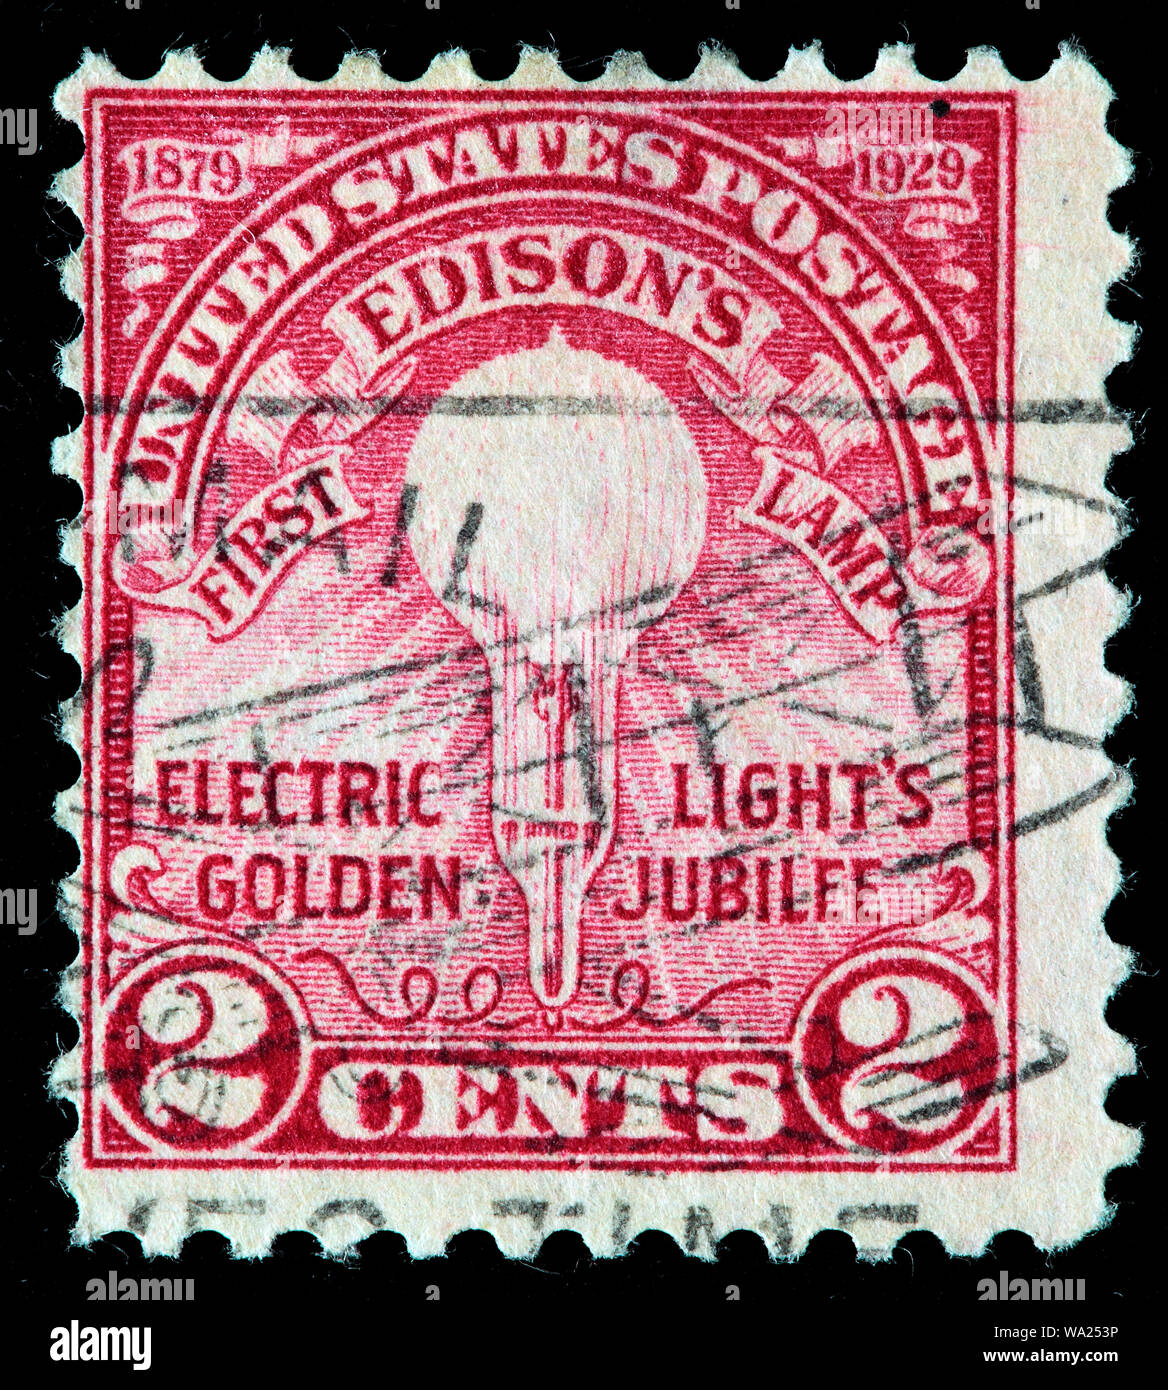 Thomas Edison's First Lamp, 1879, Electric Light's Golden Jubilee, postage stamp, USA, 1929 Stock Photo